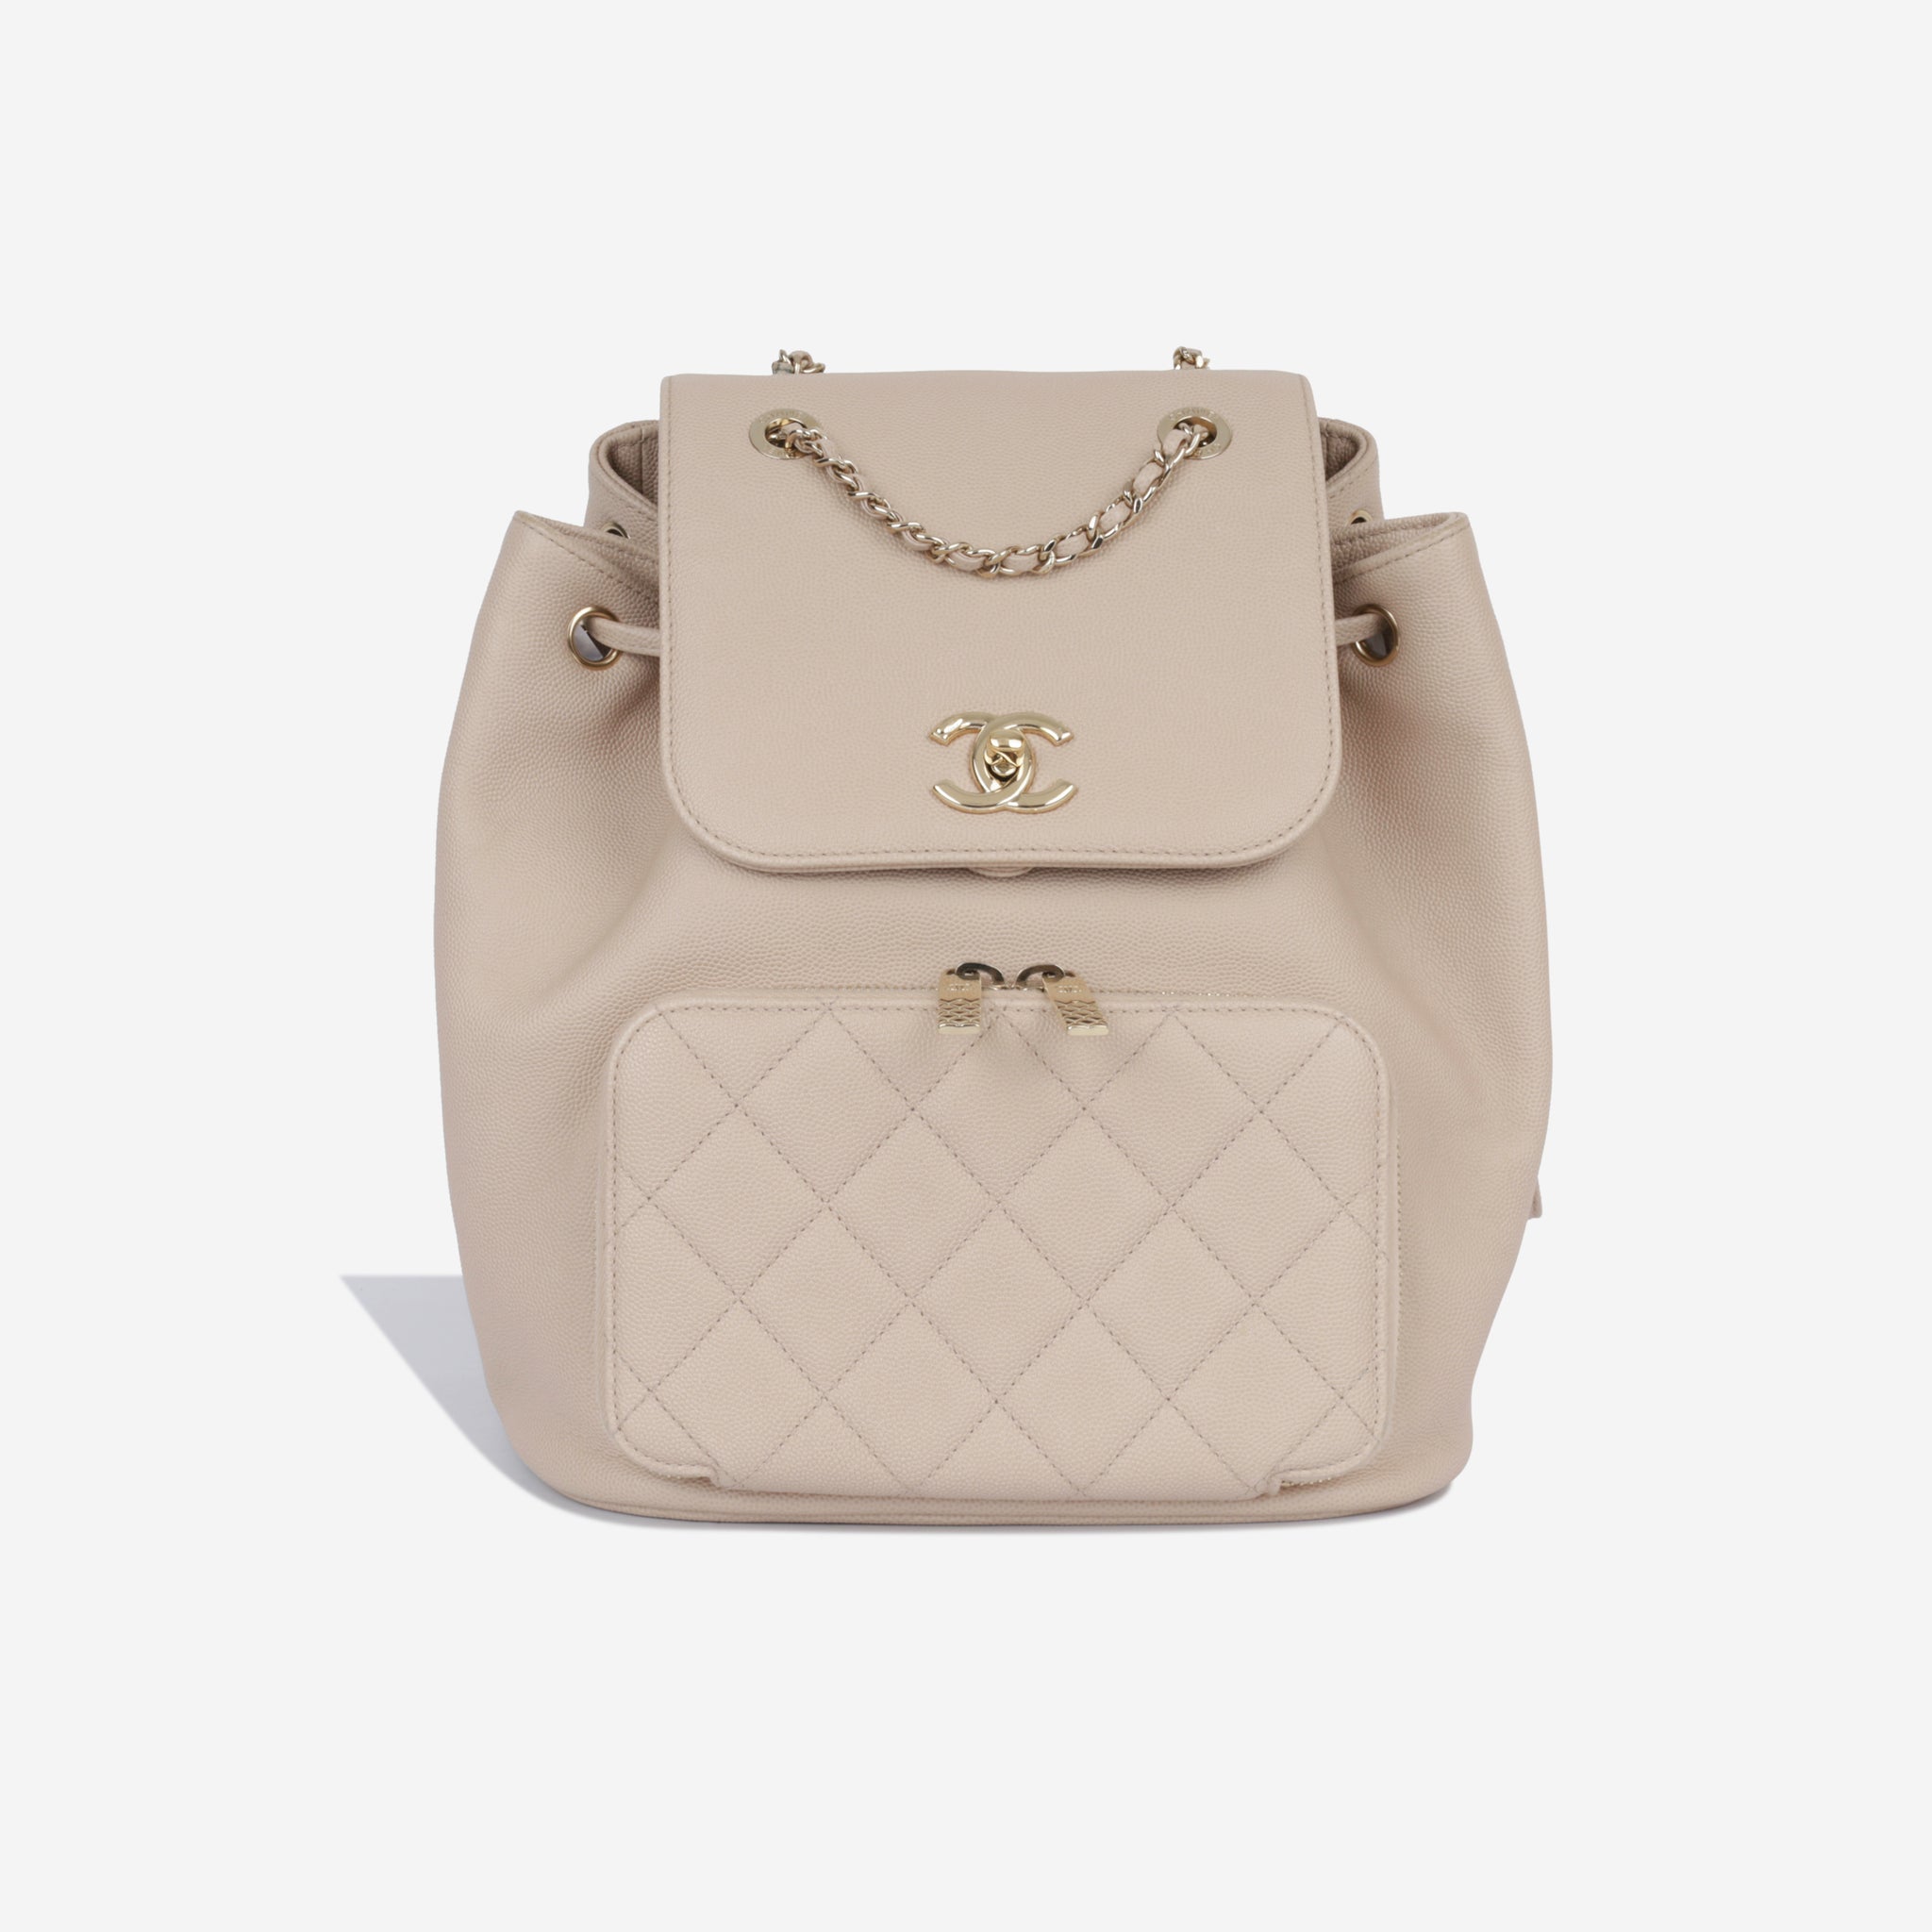 Chanel Business Affinity Bag Small - 11 For Sale on 1stDibs